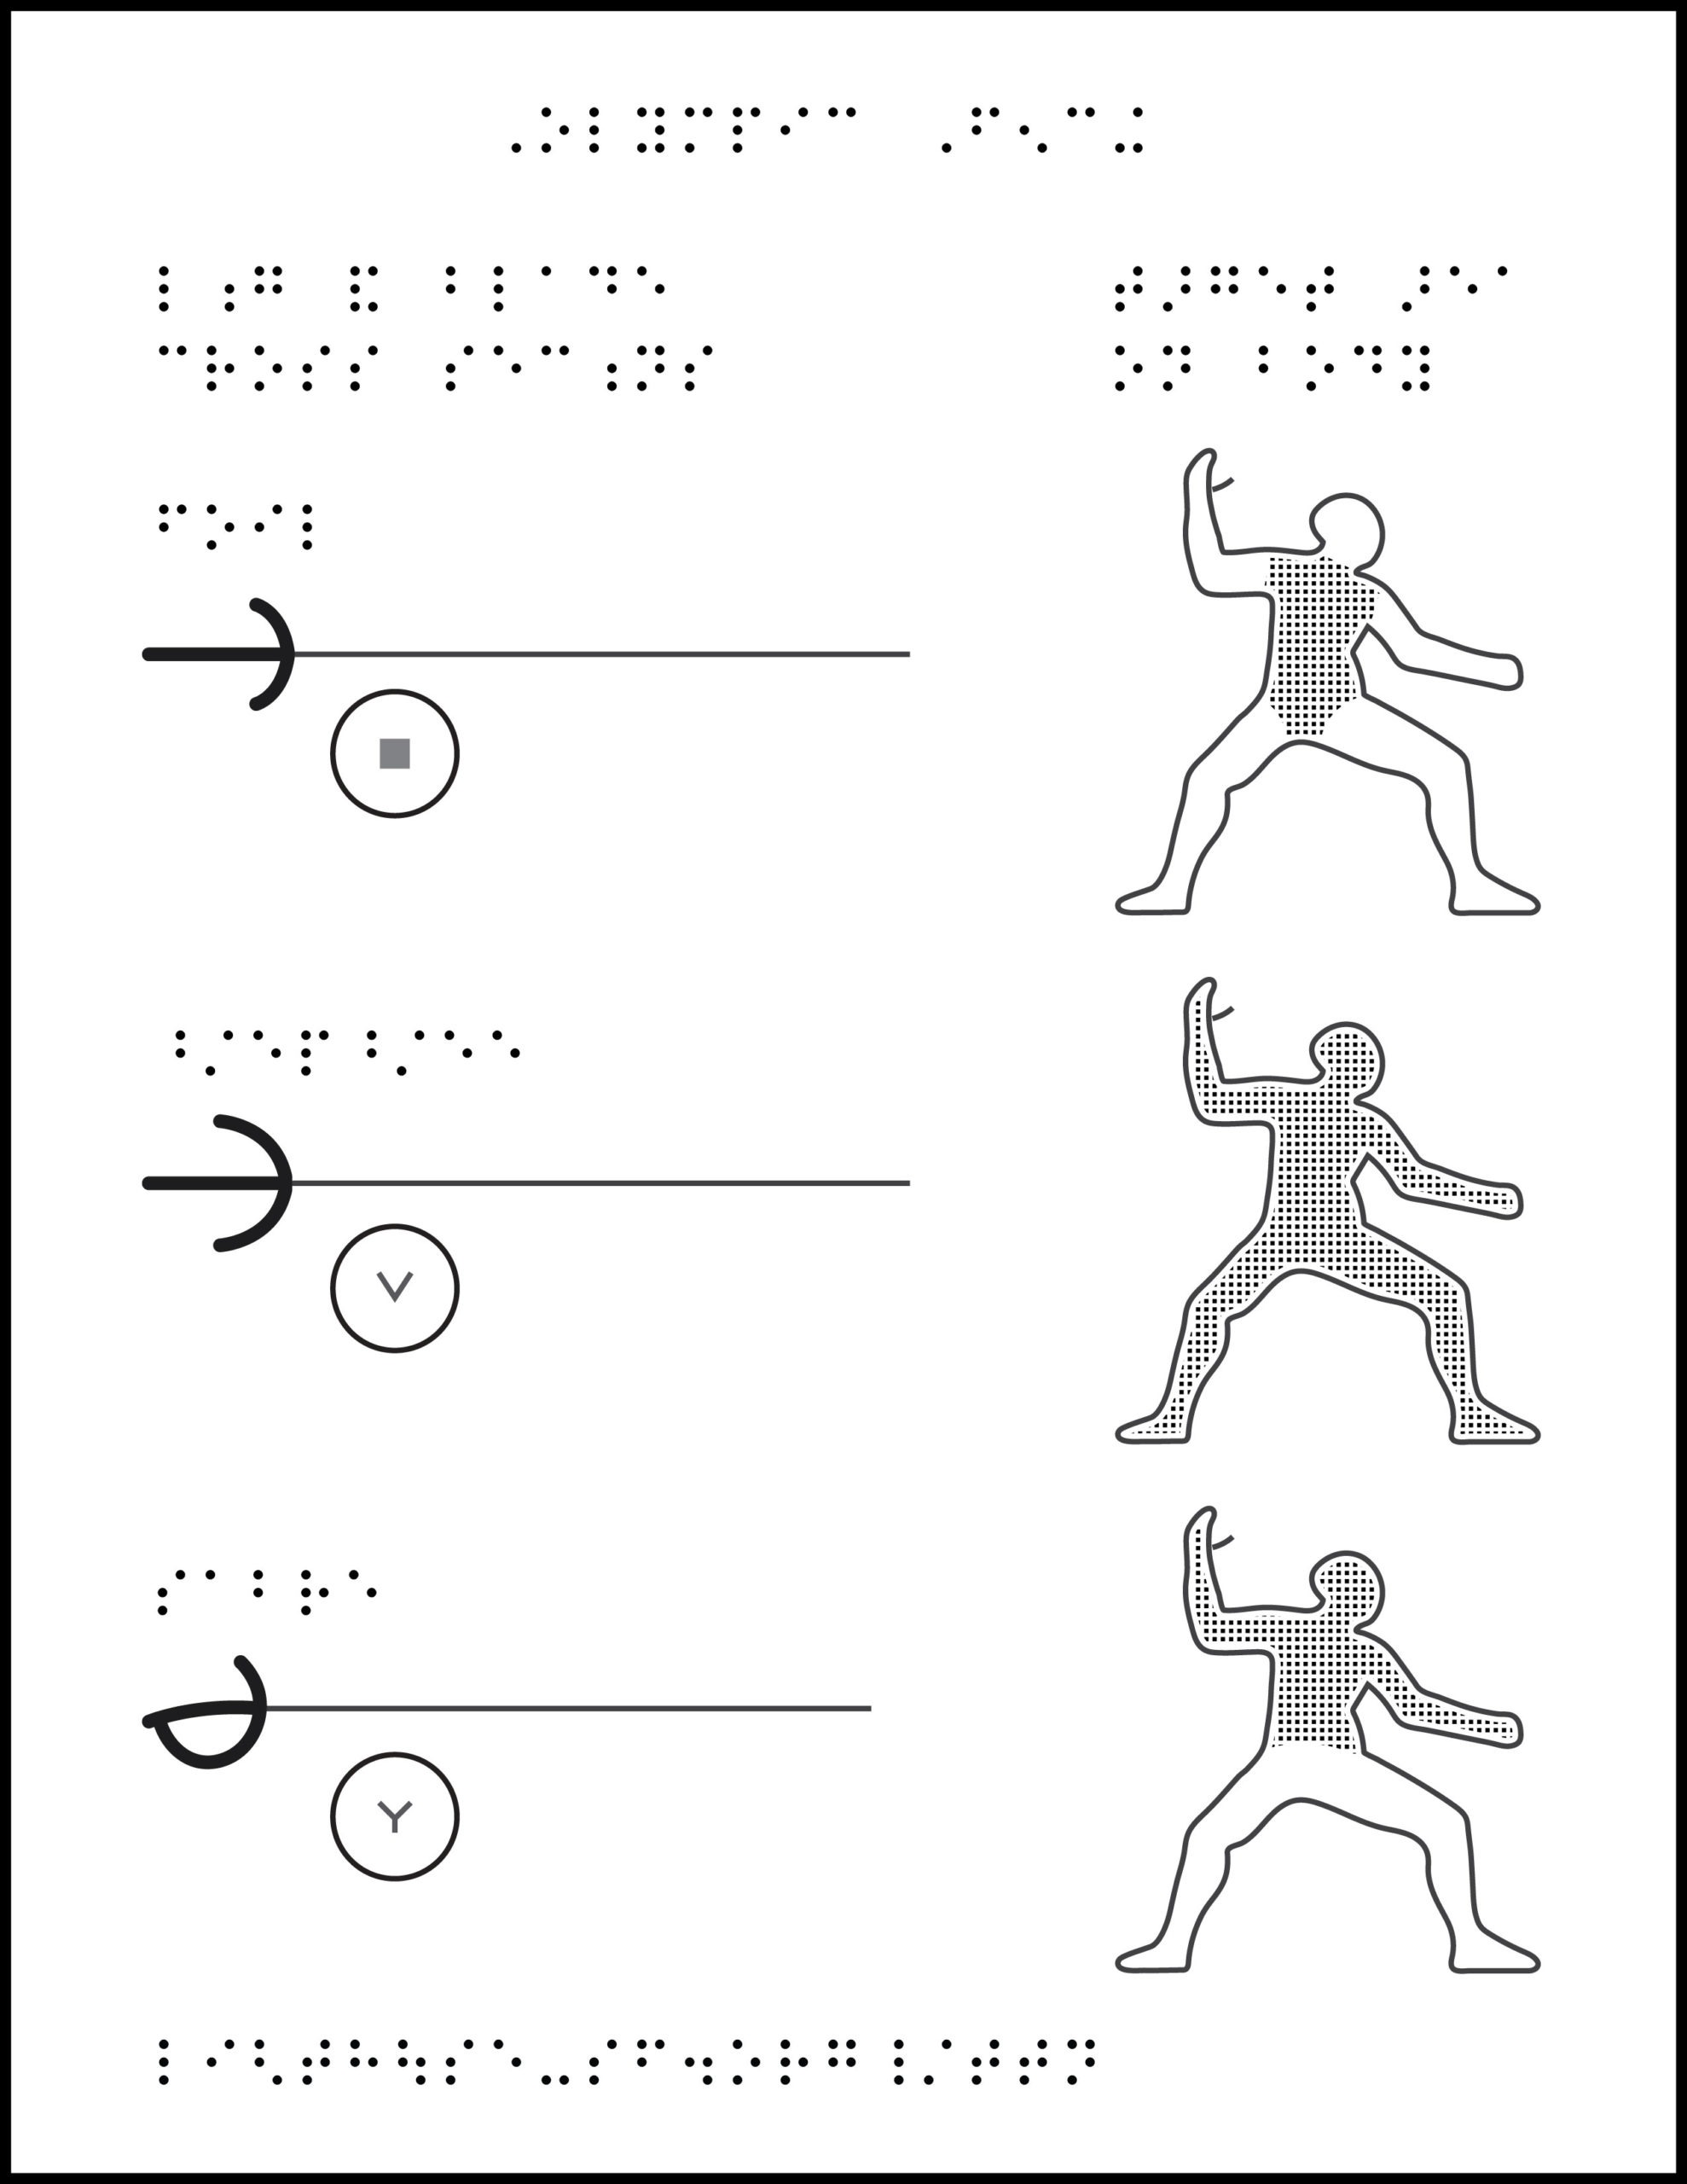 Three horizontal fencing weapons, blade cross sections in circles, and shaded target areas on body, with braille labels.